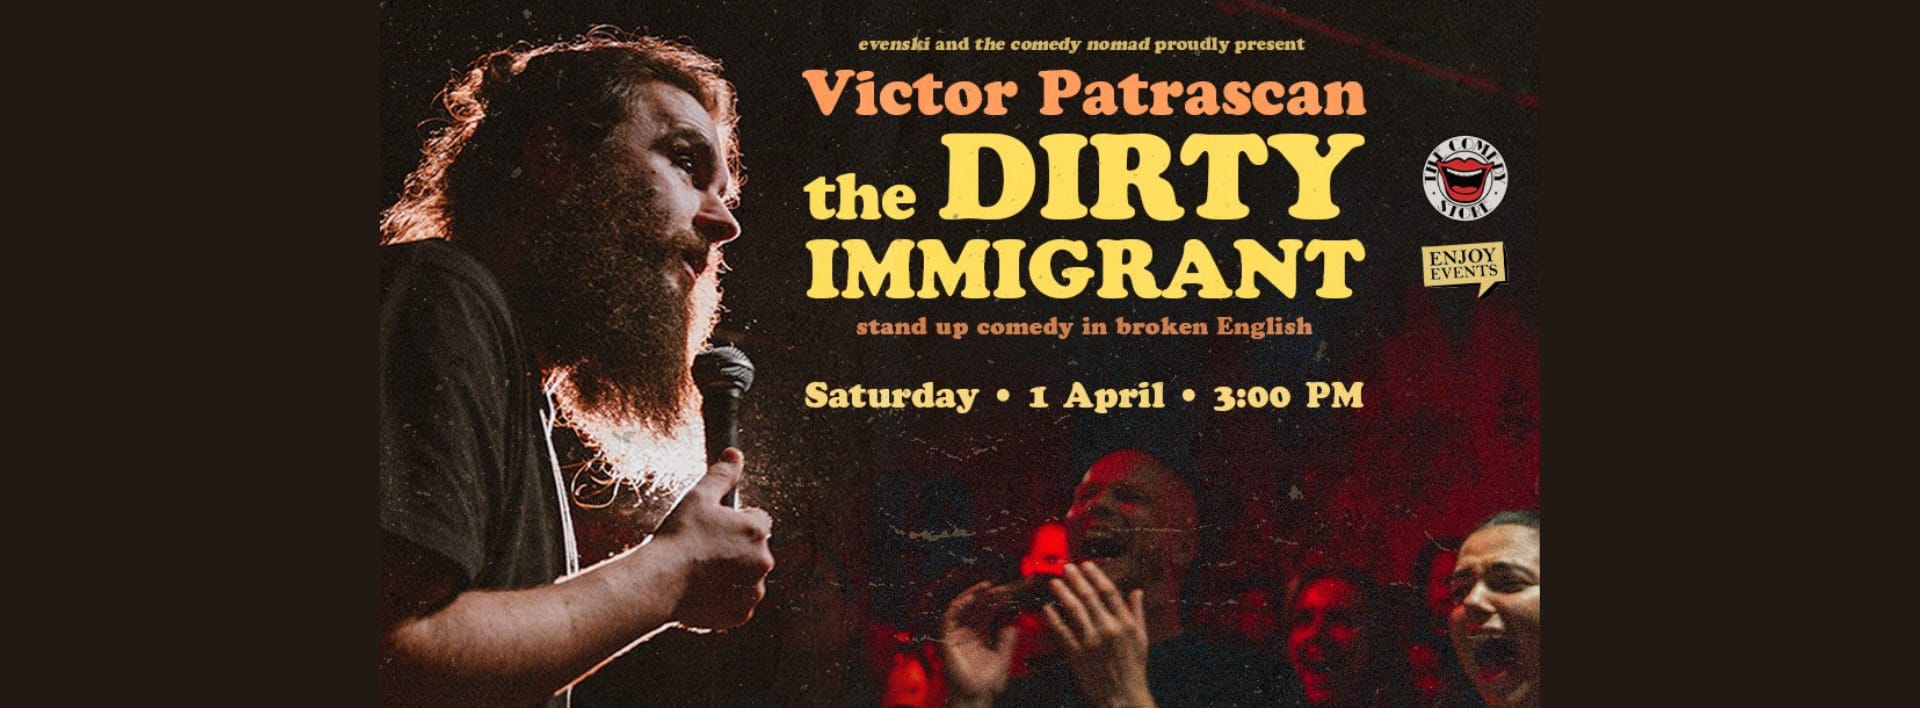 The Dirty Immigrant